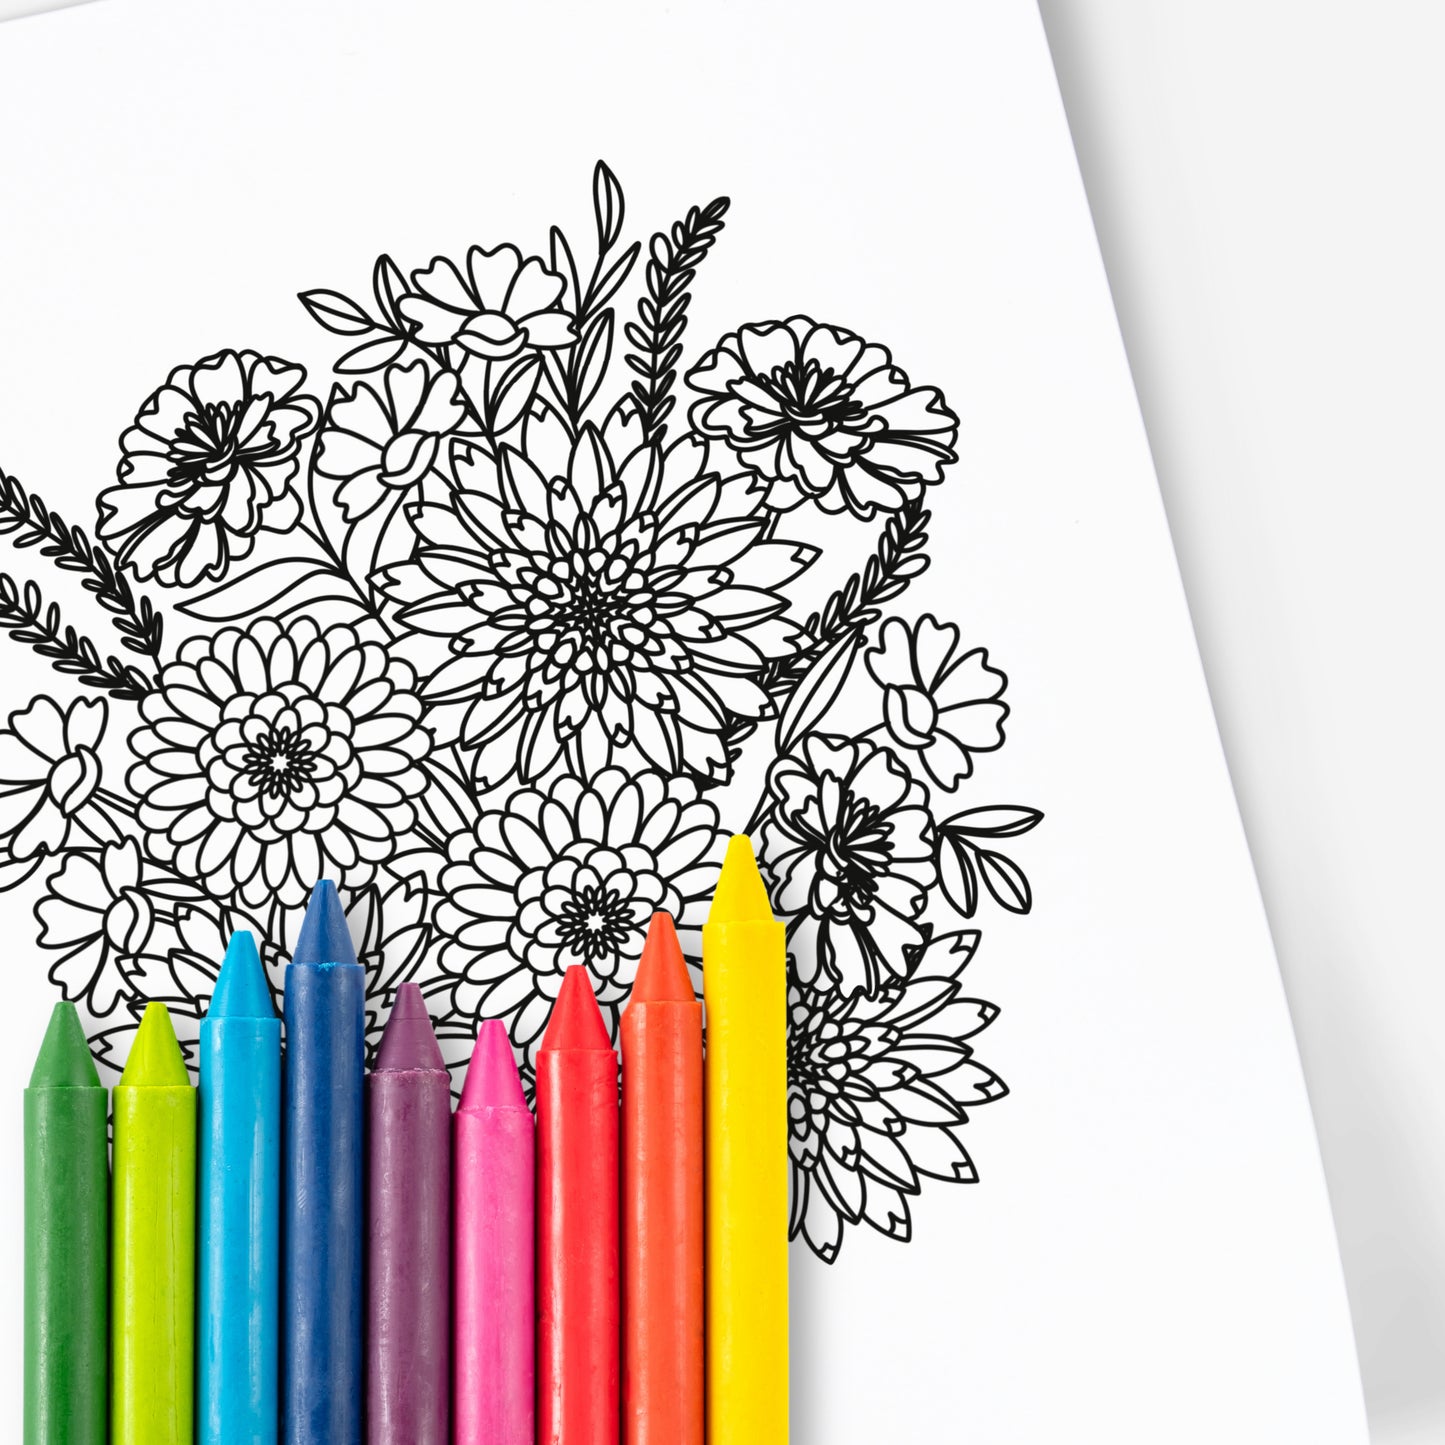 Floral Bouquet Coloring Page Printable | Mindful Flower Digital Coloring Sheets | Calming Nature Illustration